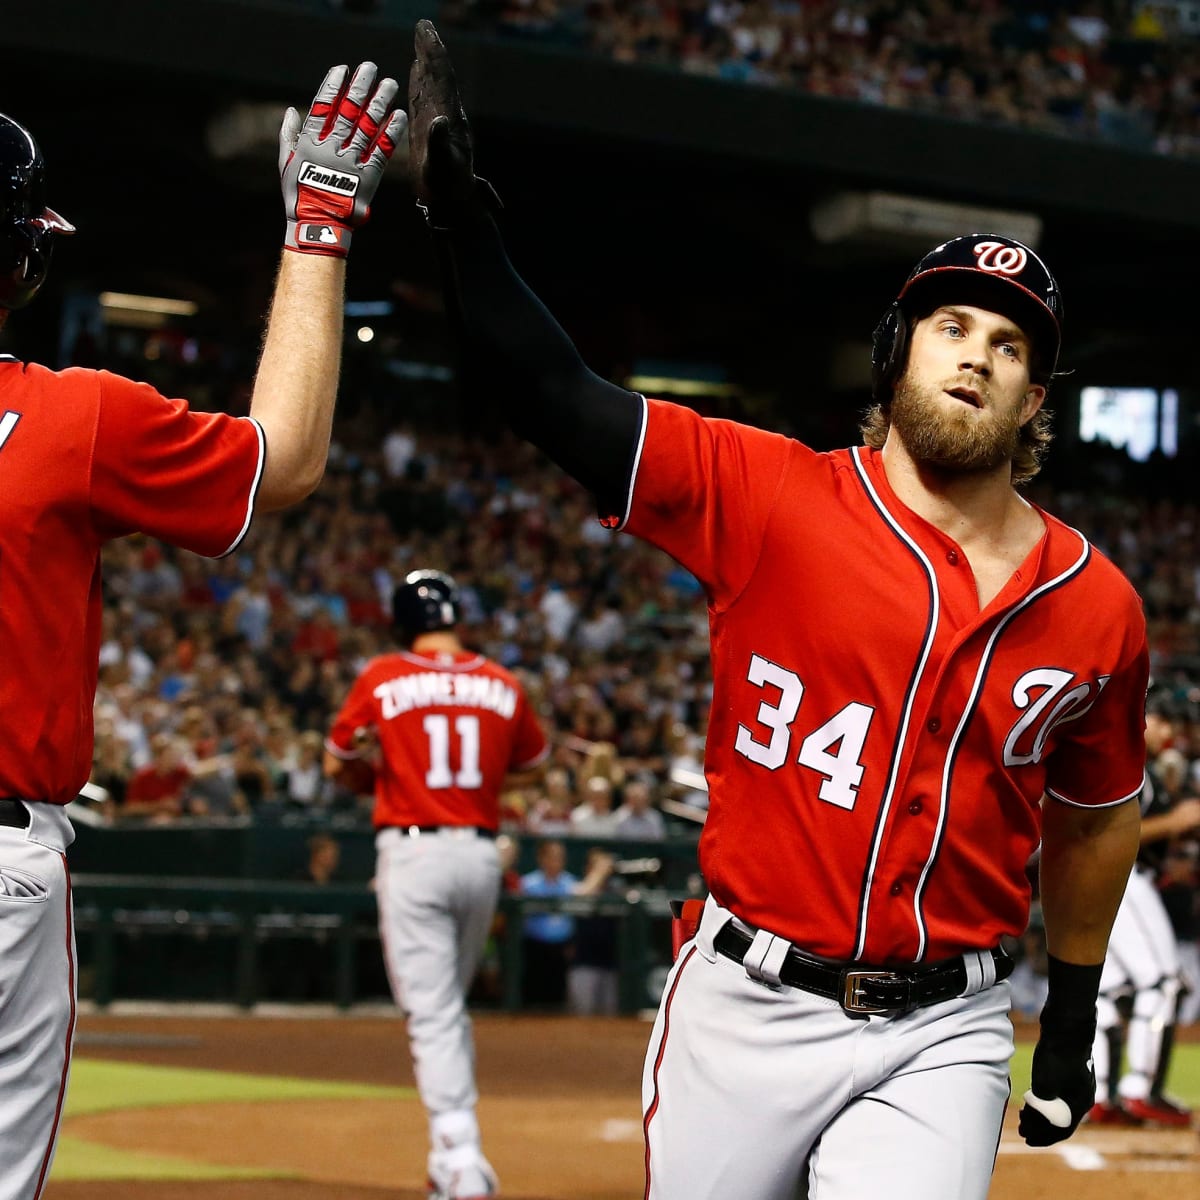 Nationals Hit 4 Homers in a Row Against the Brewers - The New York Times